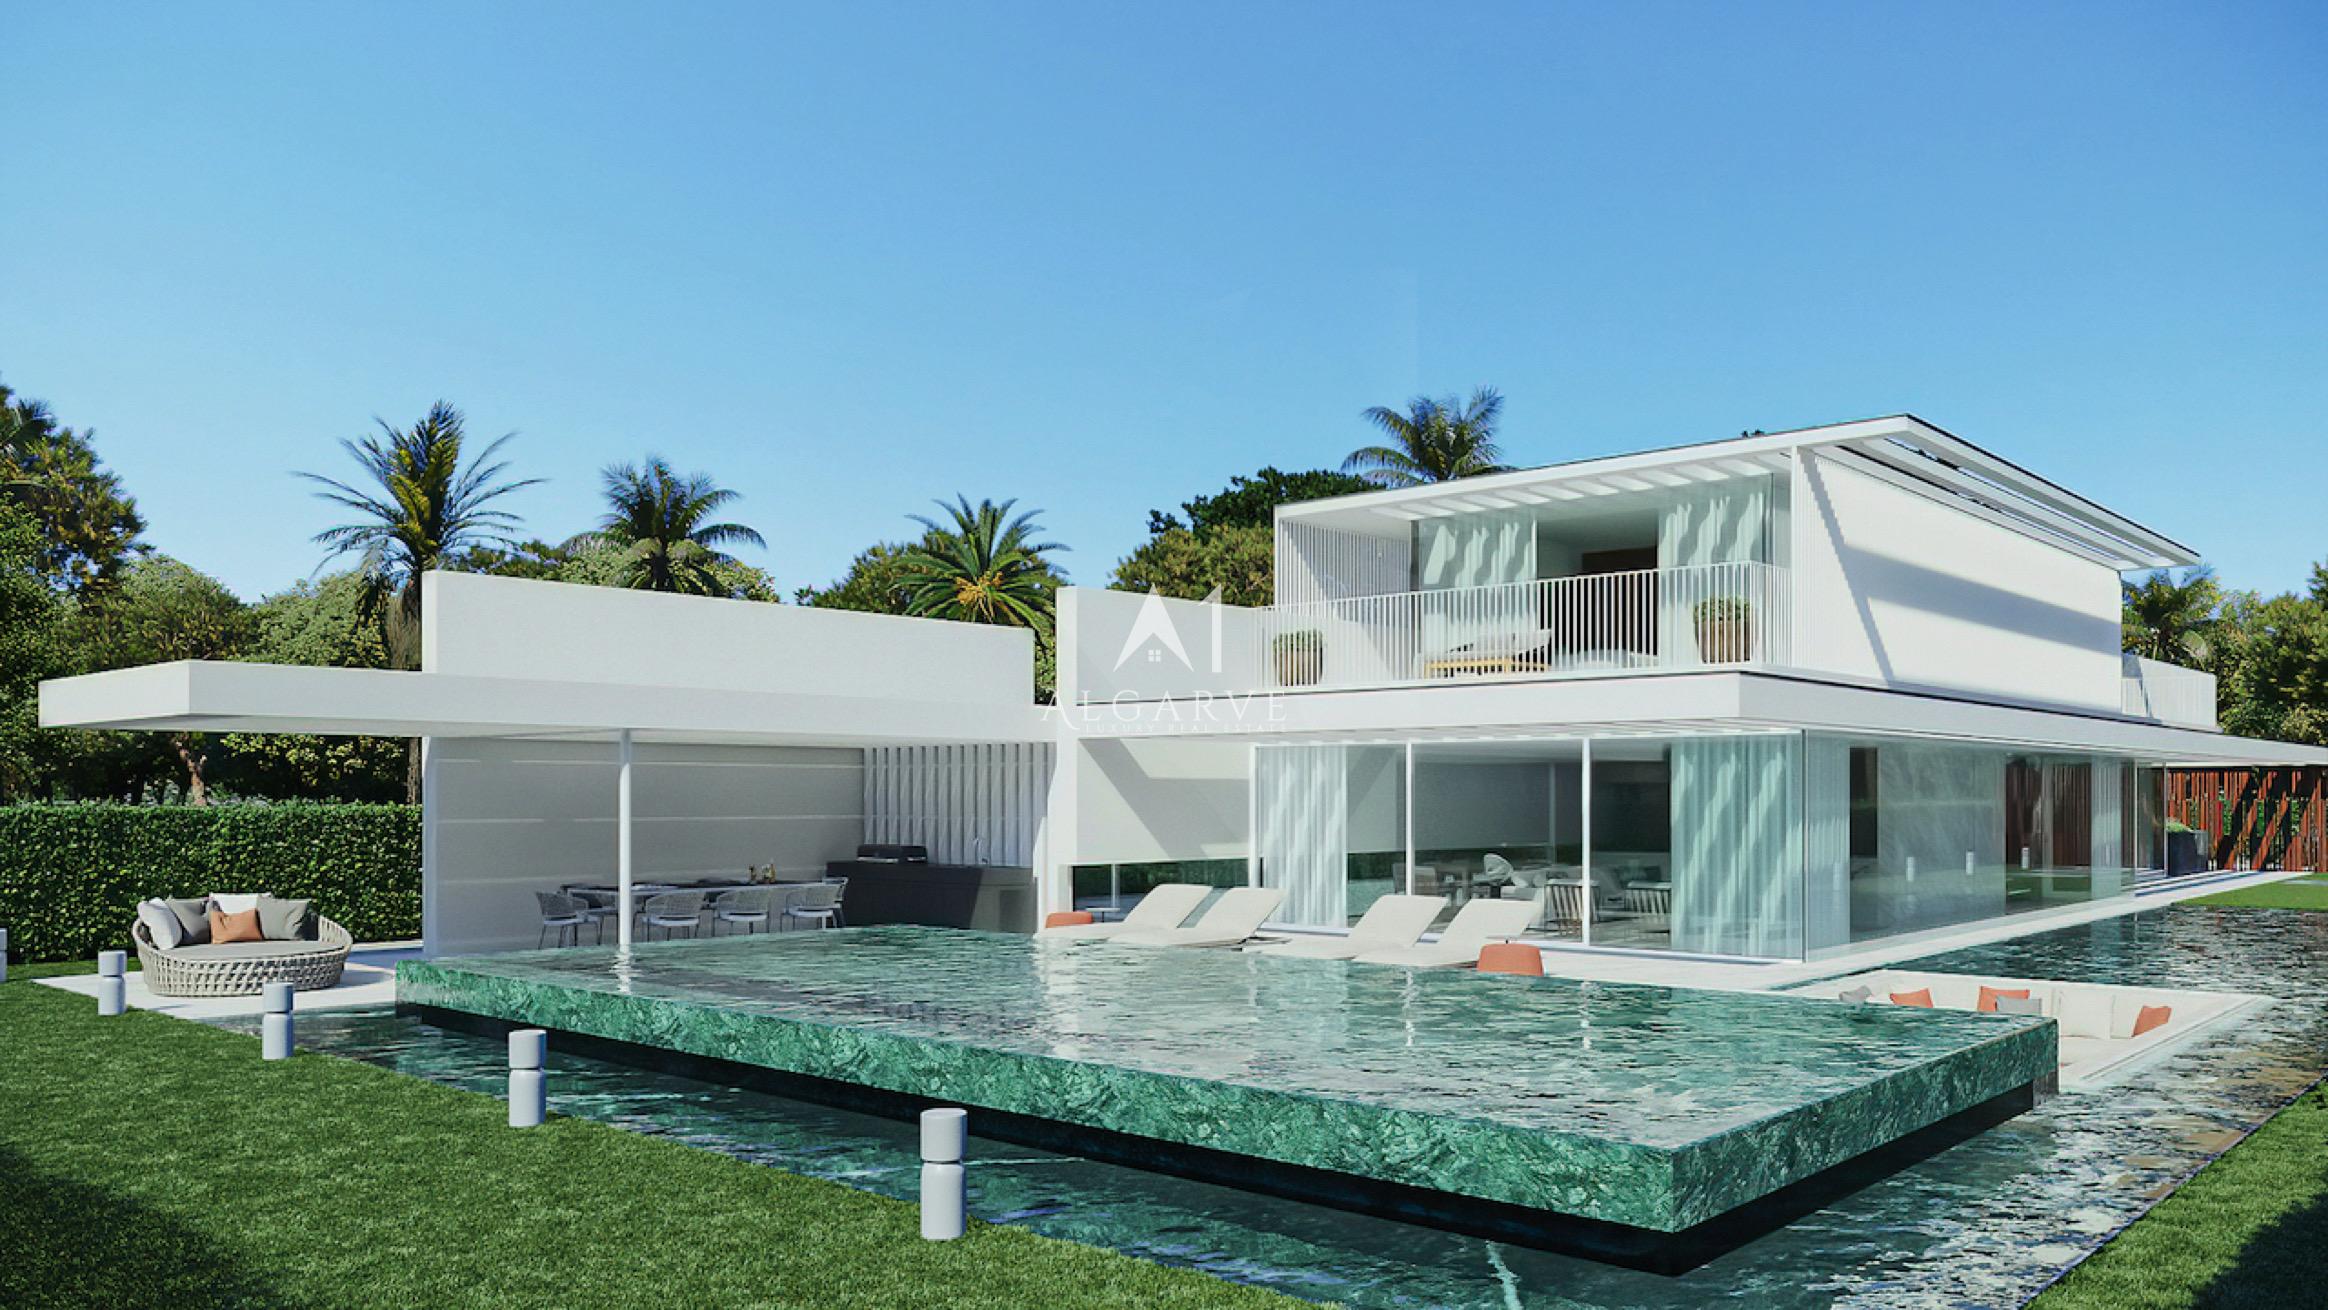 SHAPE HOUSE, A MODERN LUXURIOUS FAMILY HOME IN VILAMOURA, UNDER CONSTRUCTION